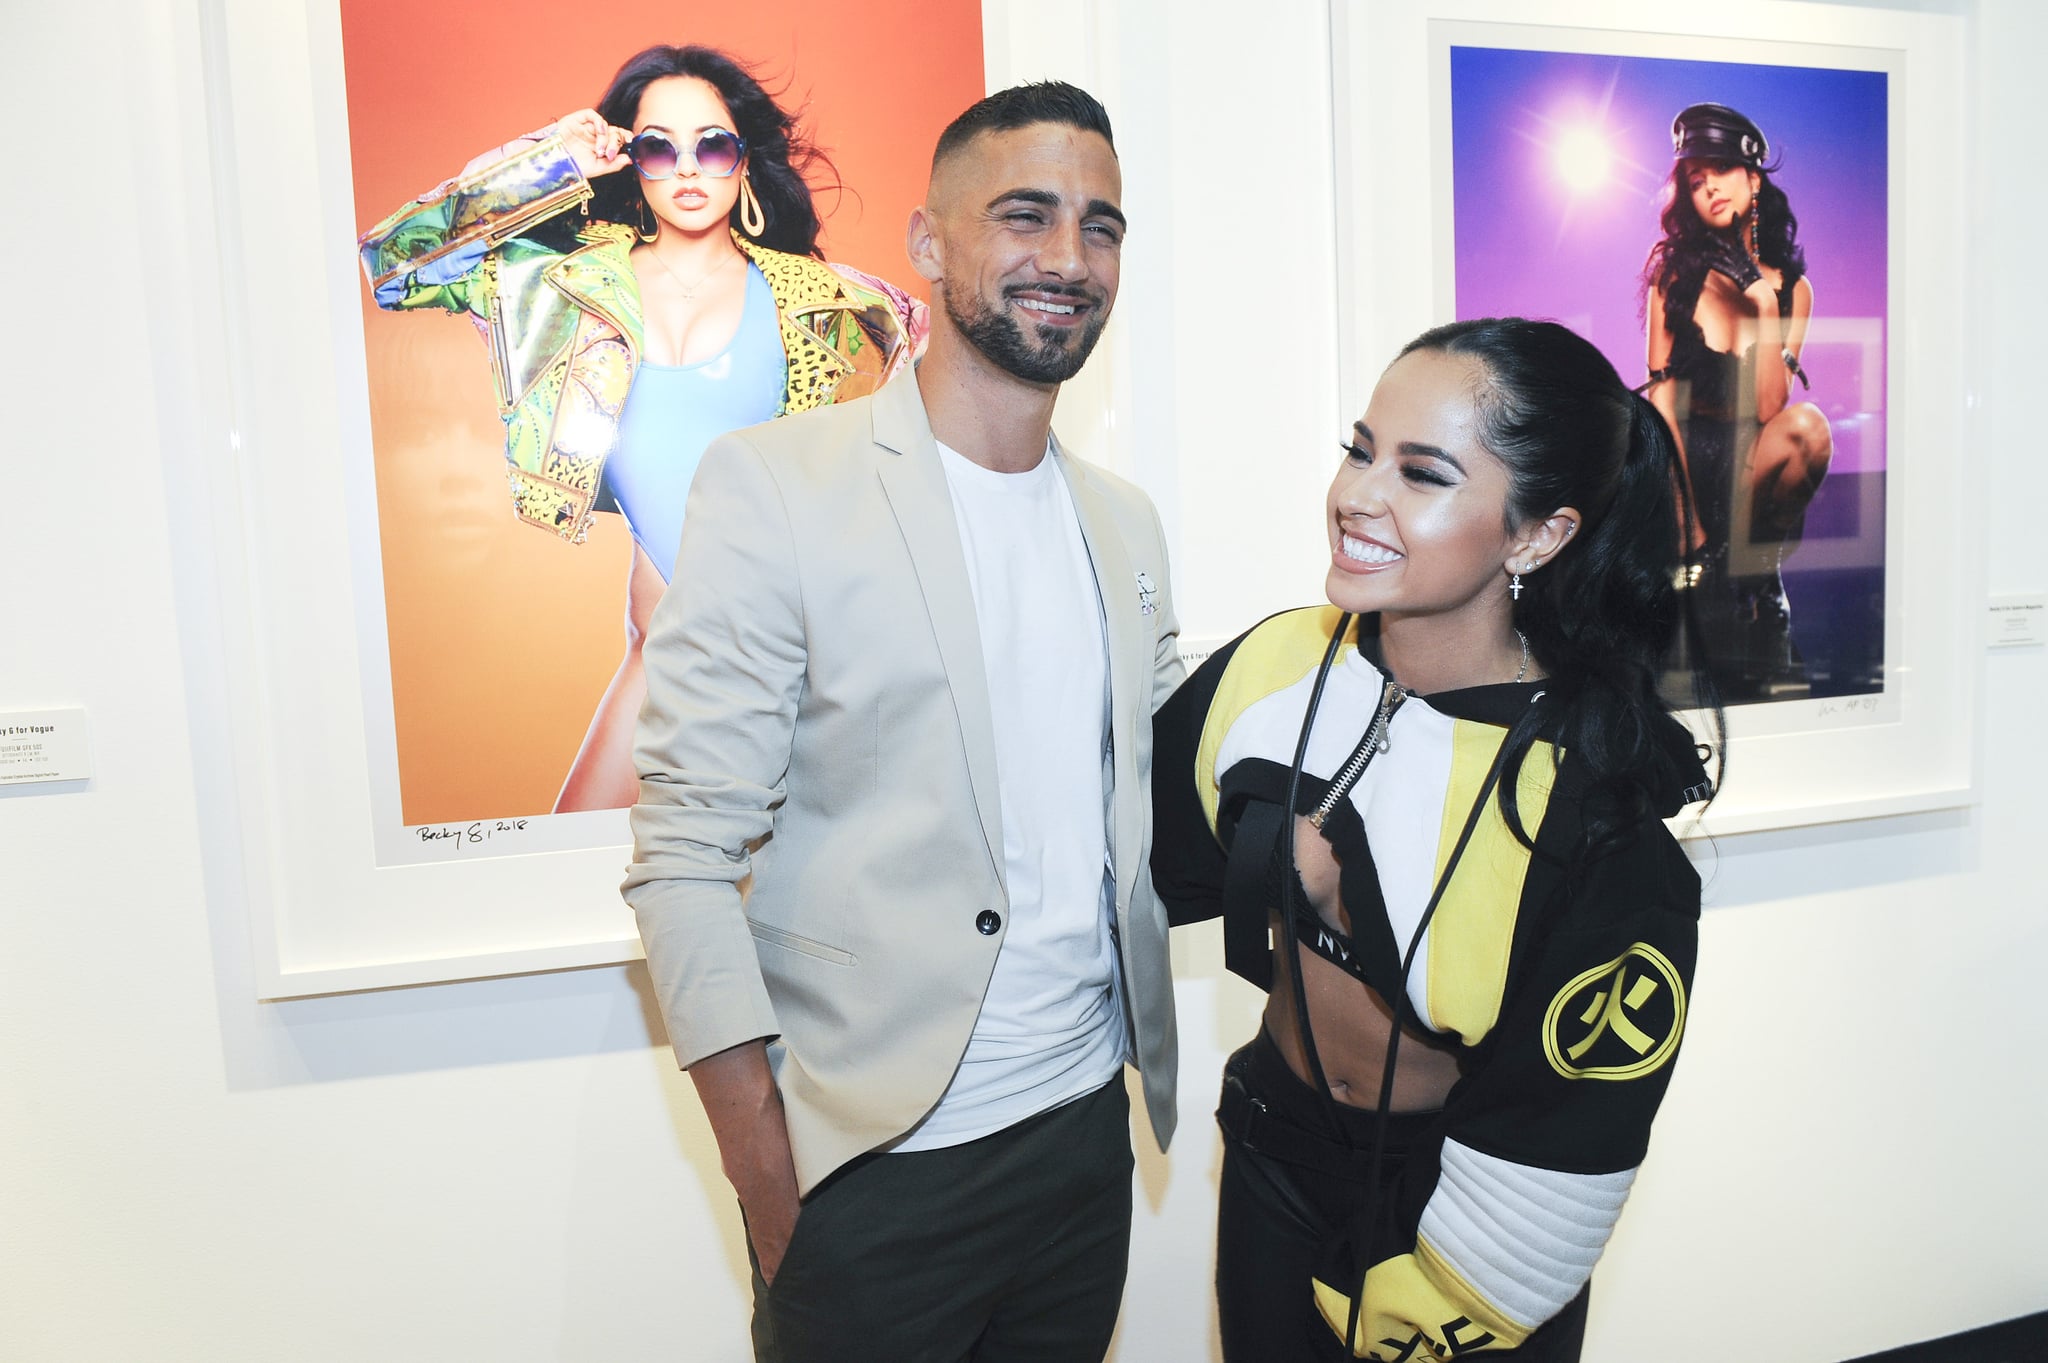 LOS ANGELES, CA - JUNE 14:  Sebastian Lletget and Becky G attend the 2000s Exhibition Opening at Mouche Gallery, Sponsored by Fujifilm on June 14, 2018 in Los Angeles, California. (Photo by Amy Graves/Getty Images for CPM)